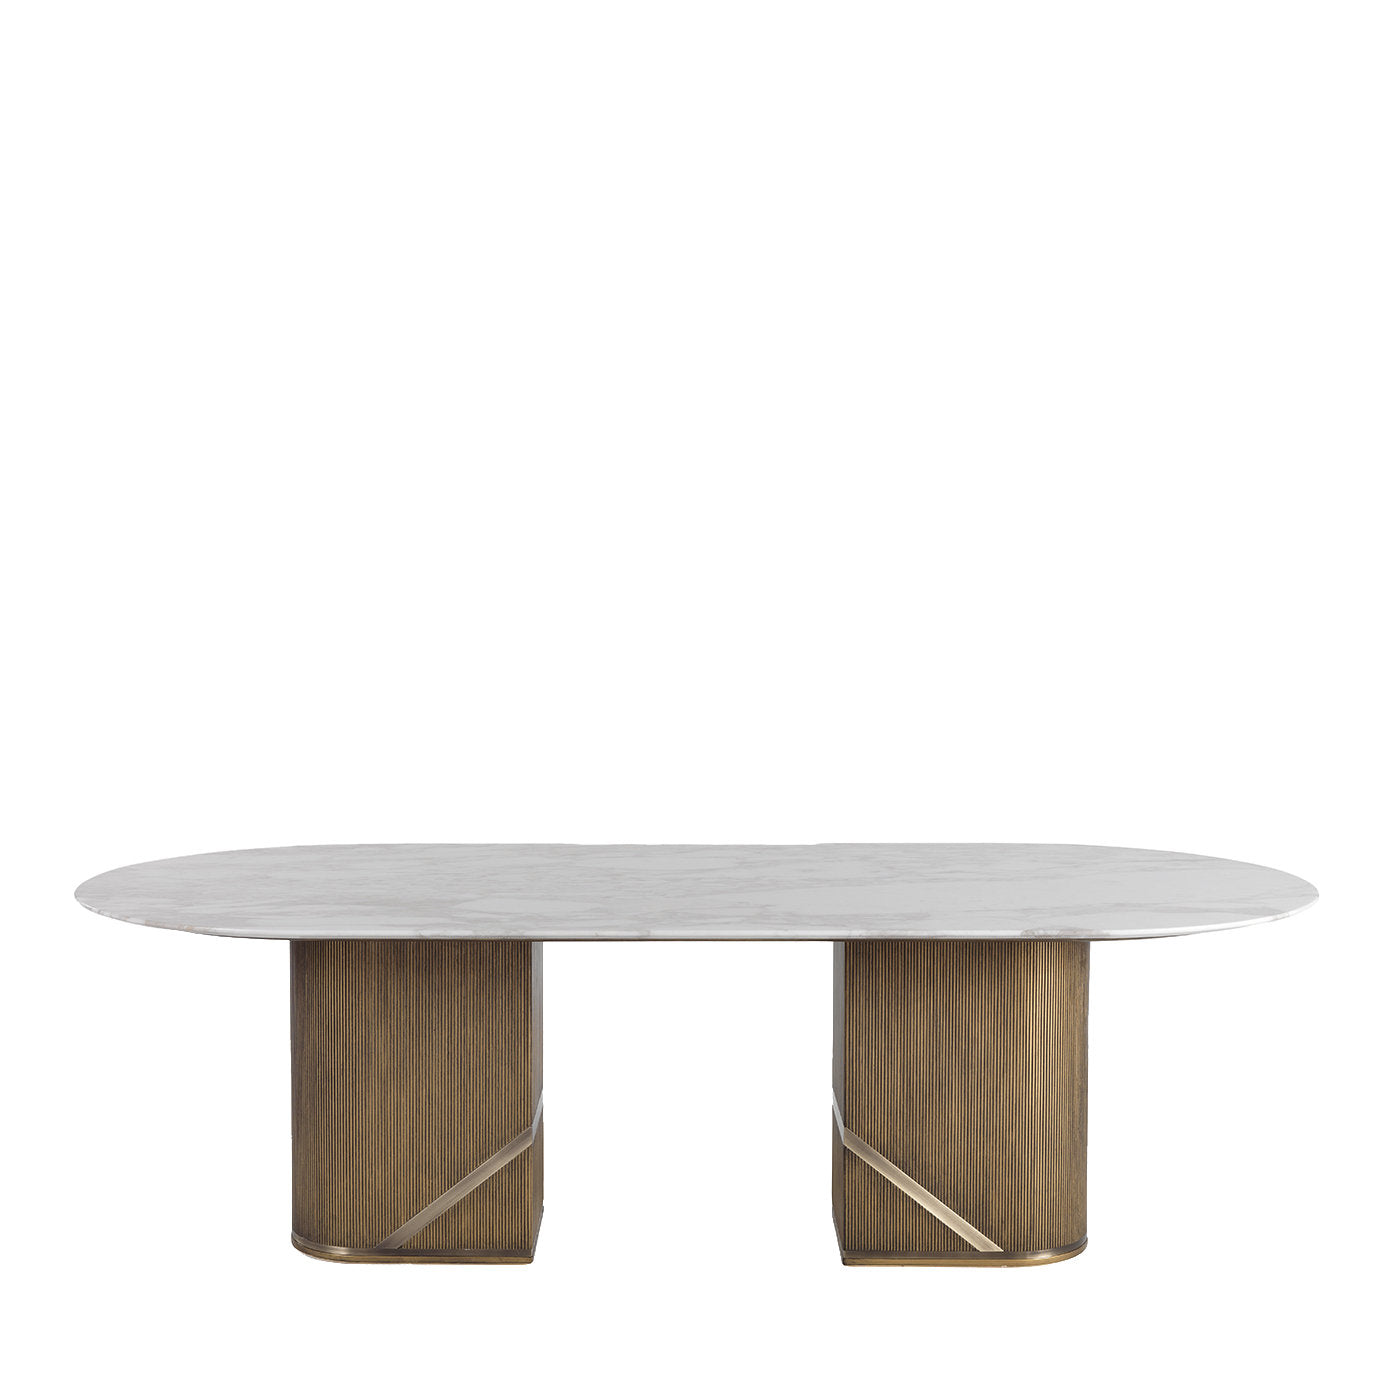 Envelope Op/14501 Dining Table By Studio Mamo - Main view